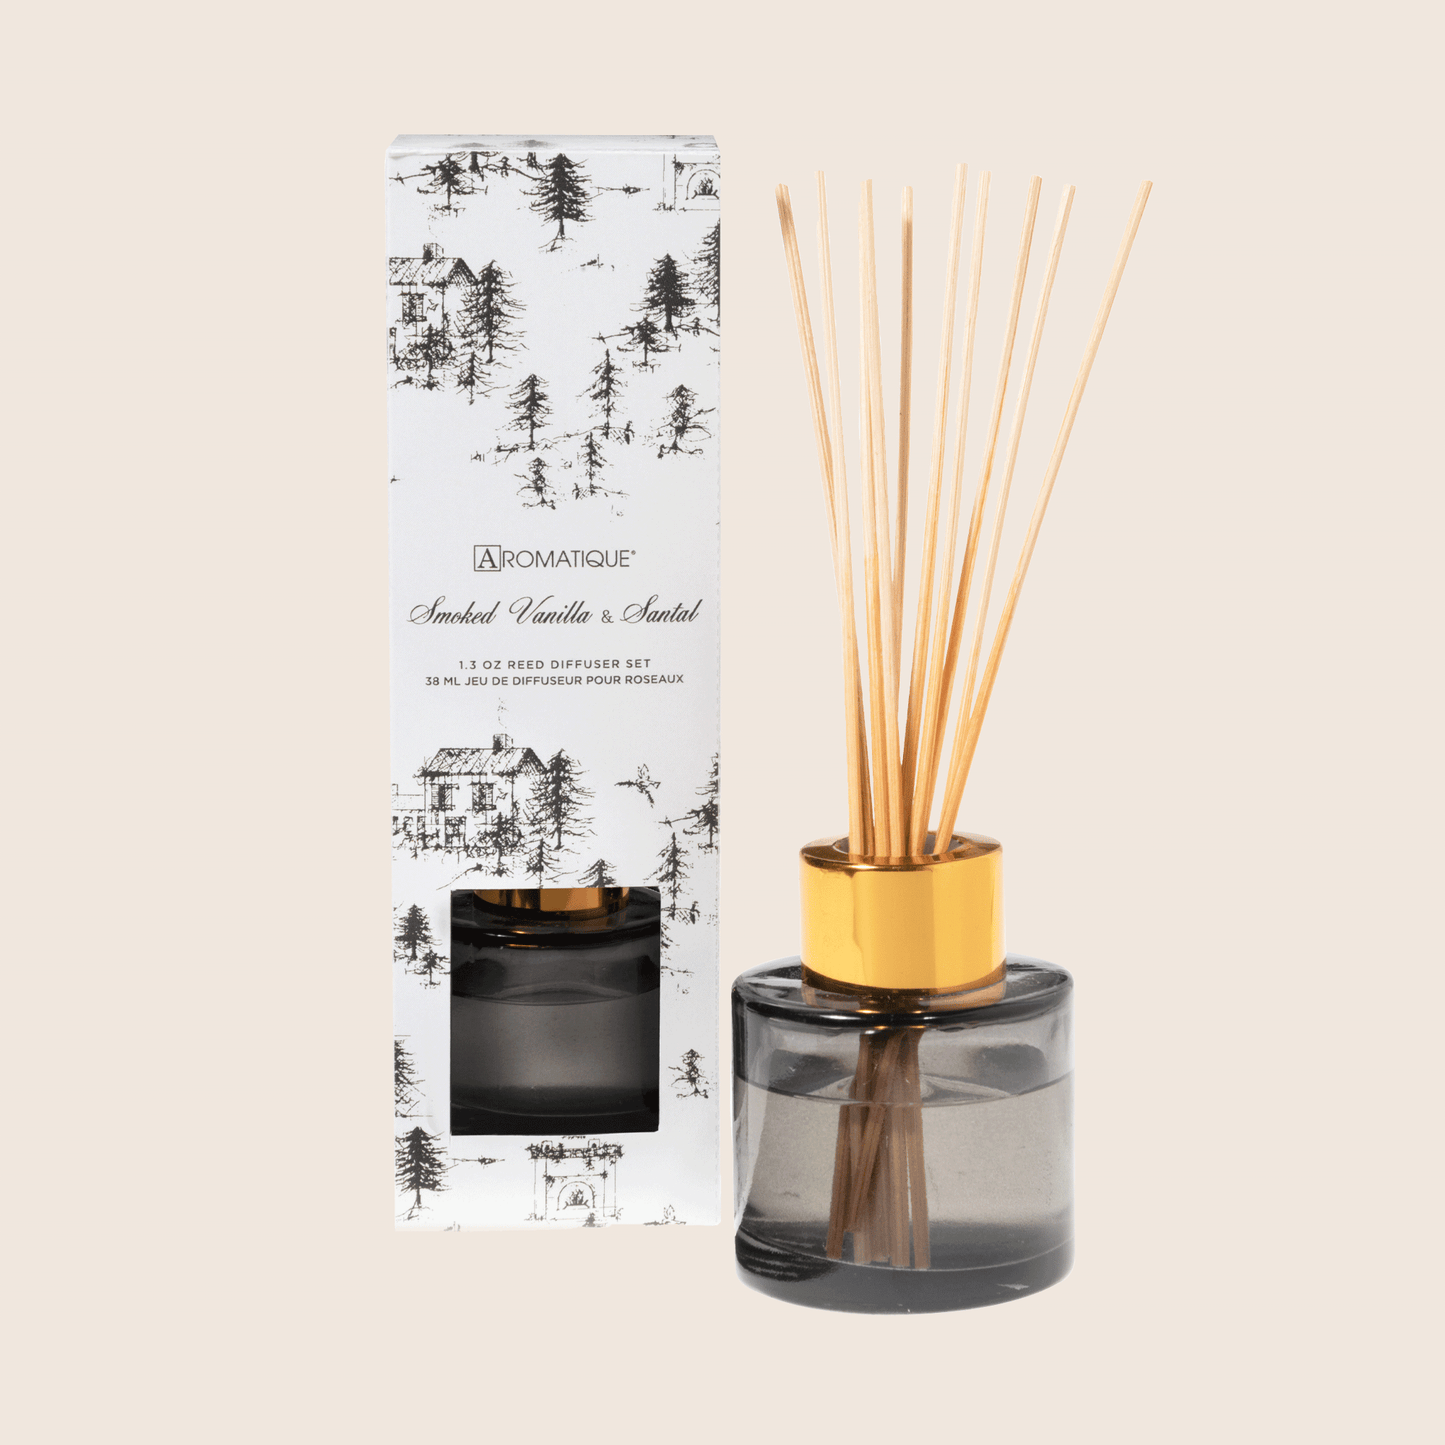 Pura Smart Fragrance Diffuser Gift Set- The Smell of Christmas + Smell of The Tree by Aromatique